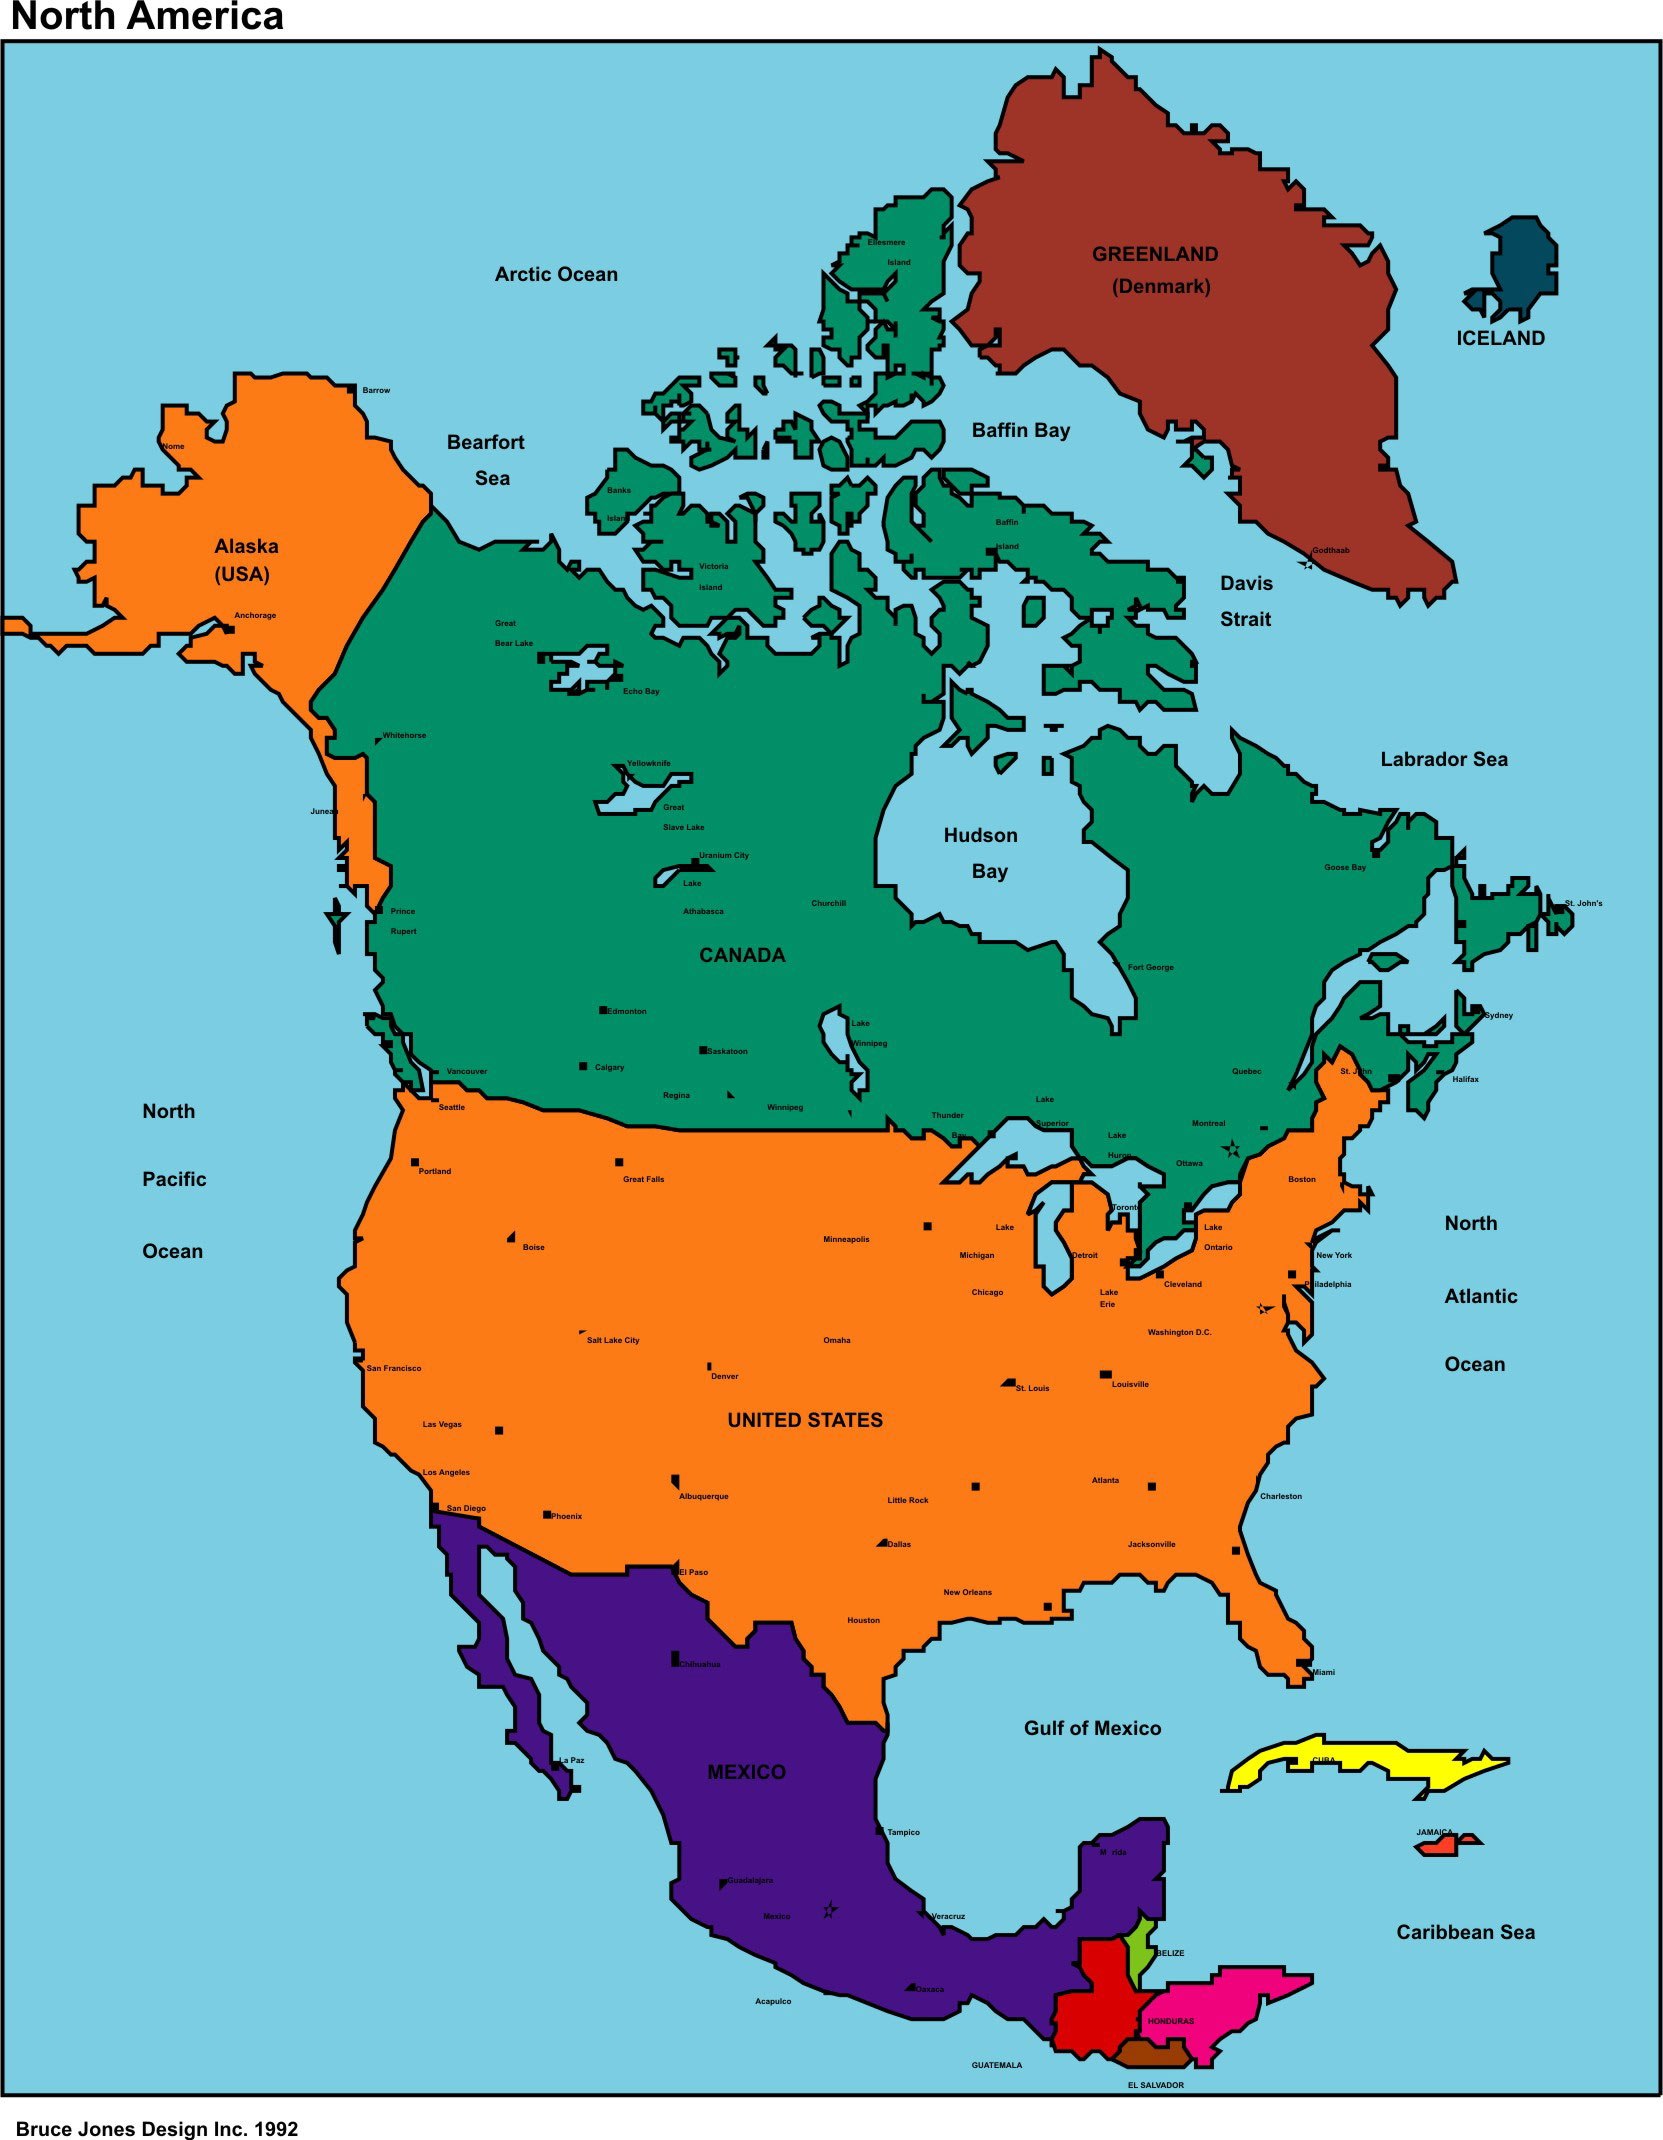 Download this America For Online Publishing This The Free North Map picture